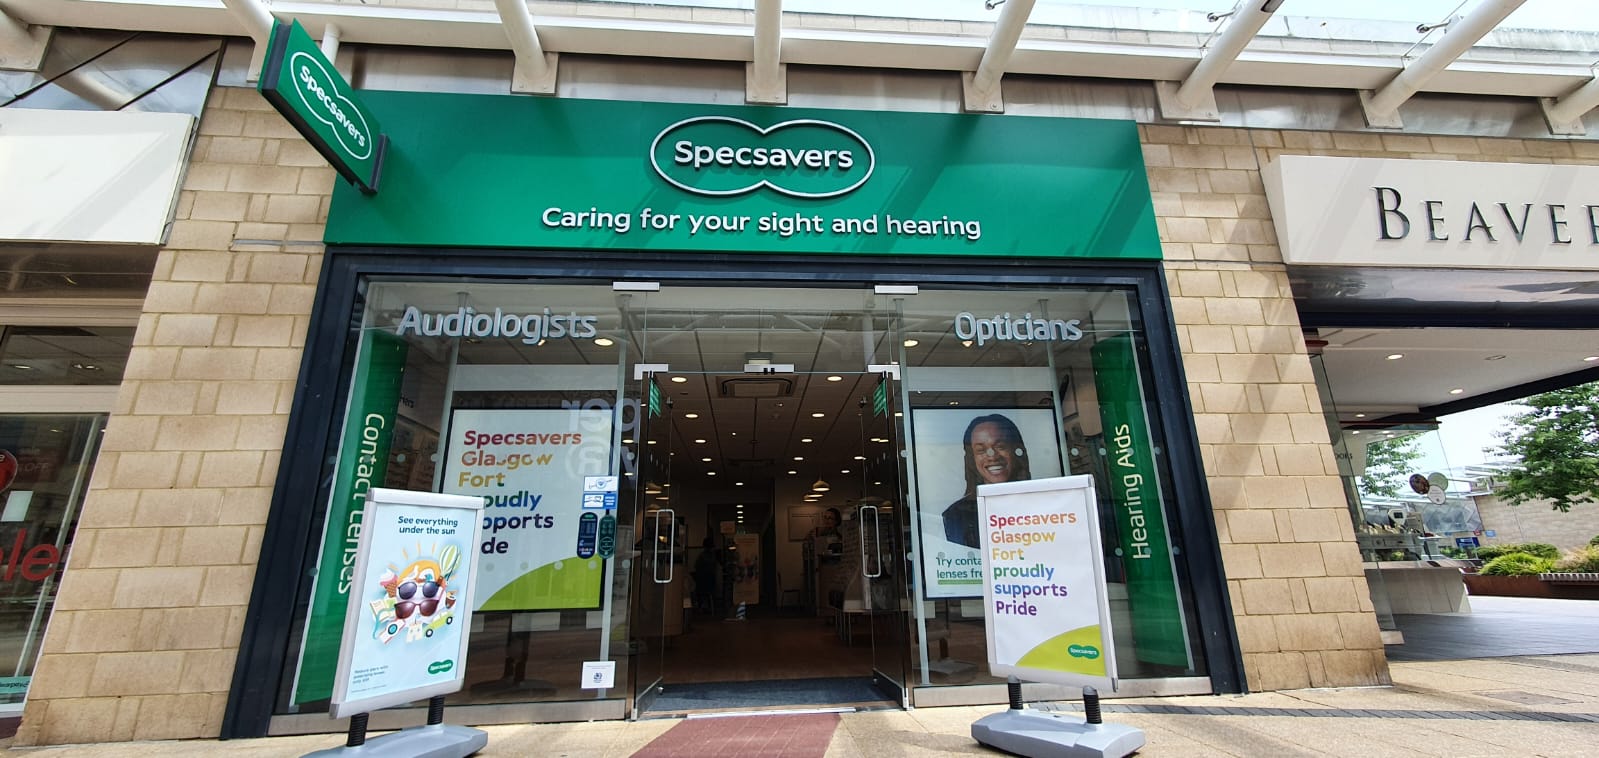 Images Specsavers Opticians and Audiologists - Glasgow Fort